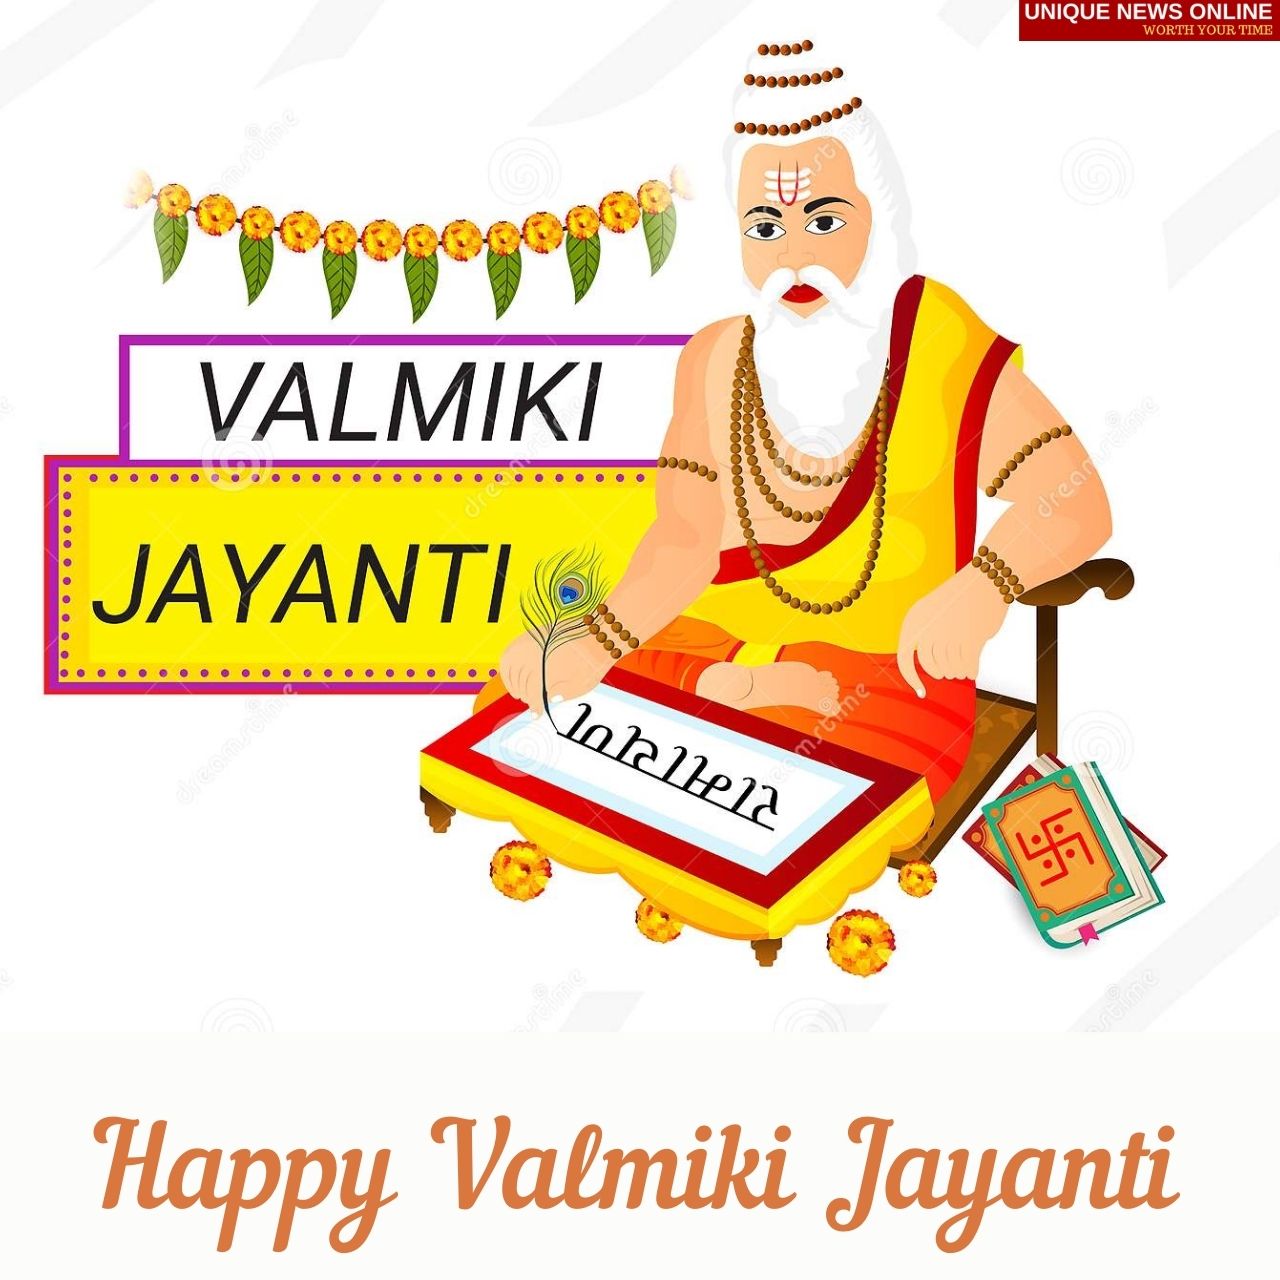 Happy Valmiki Jayanti 2021 Wishes, HD Images, Quotes, Greetings, and Messages to Share